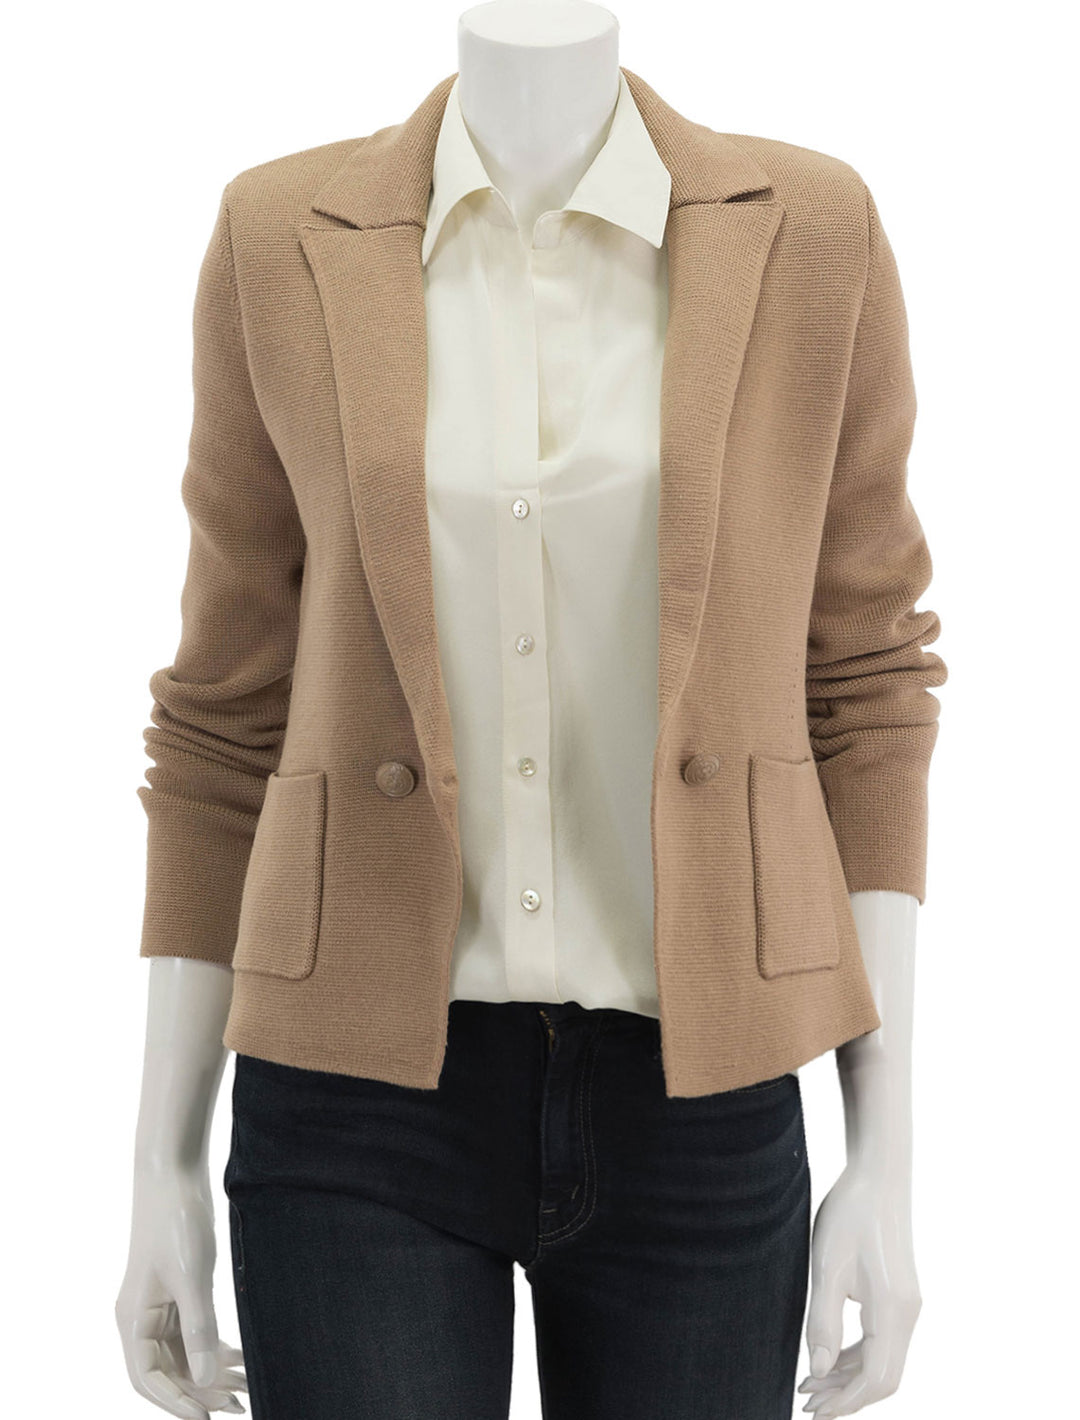 Front view of L'agence's sofia blazer in ginger snap.